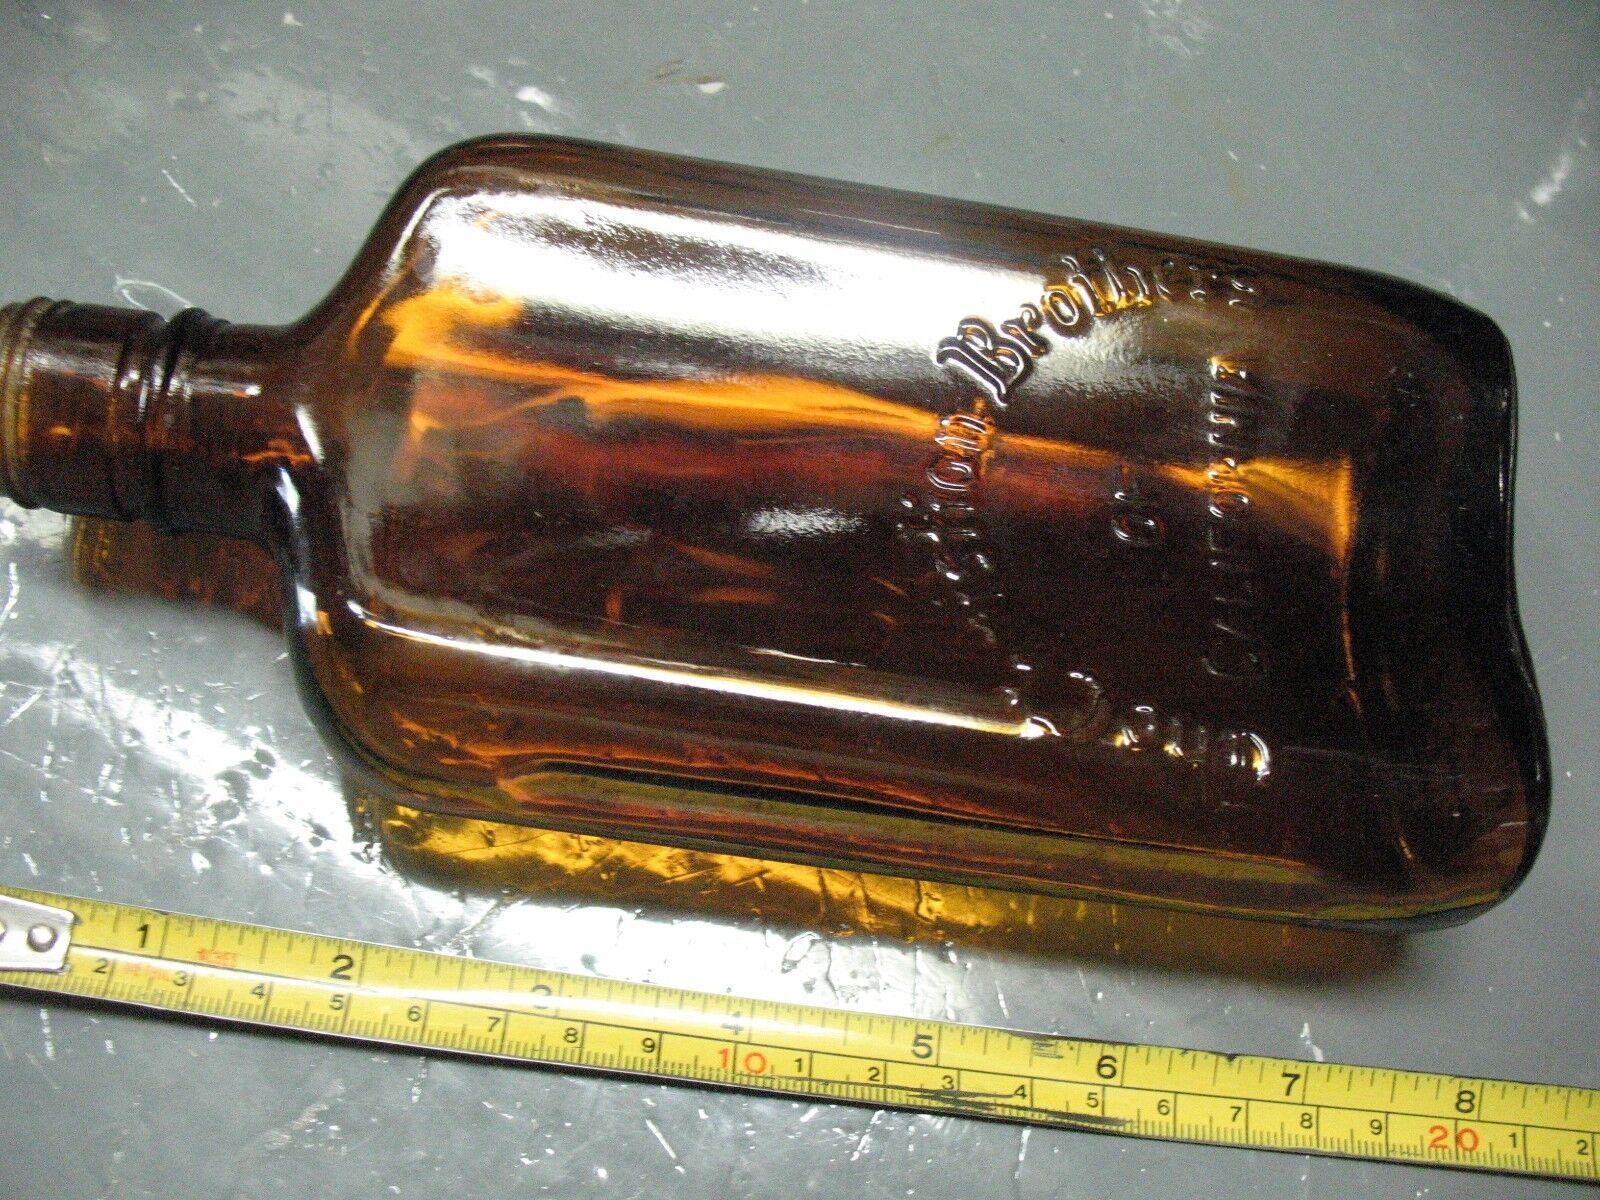 THE  CHRISTIAN  BROTHERS OF  CALIFORNIA  AMBER LIQUOR  FLASK  BOTTLE 8''   